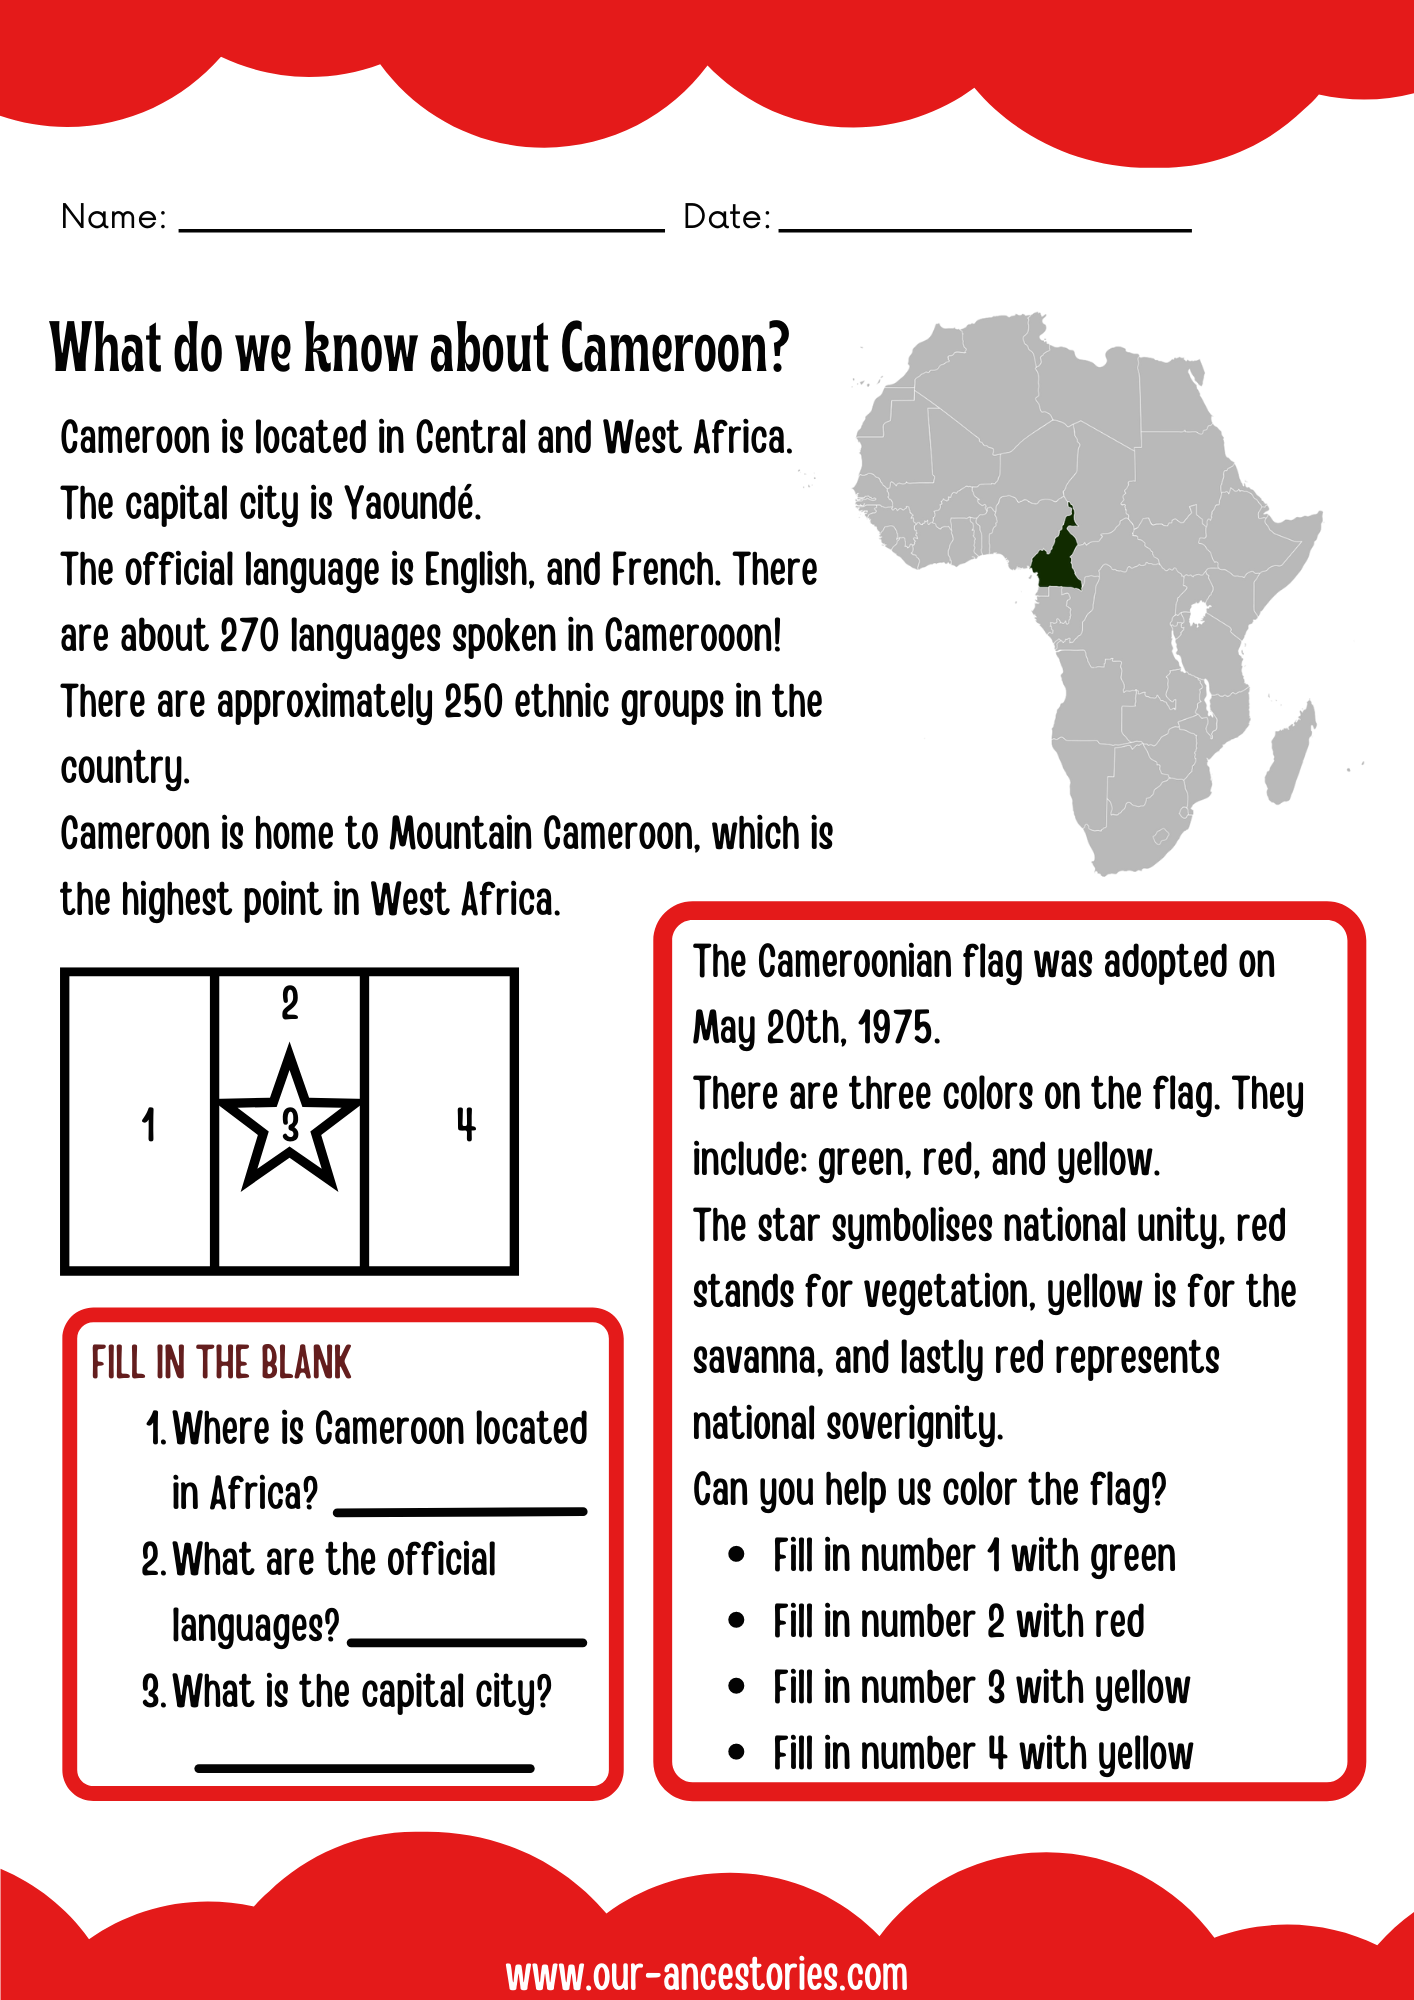 Our Ancestories - Cameroon Country Profile - Free Worksheets